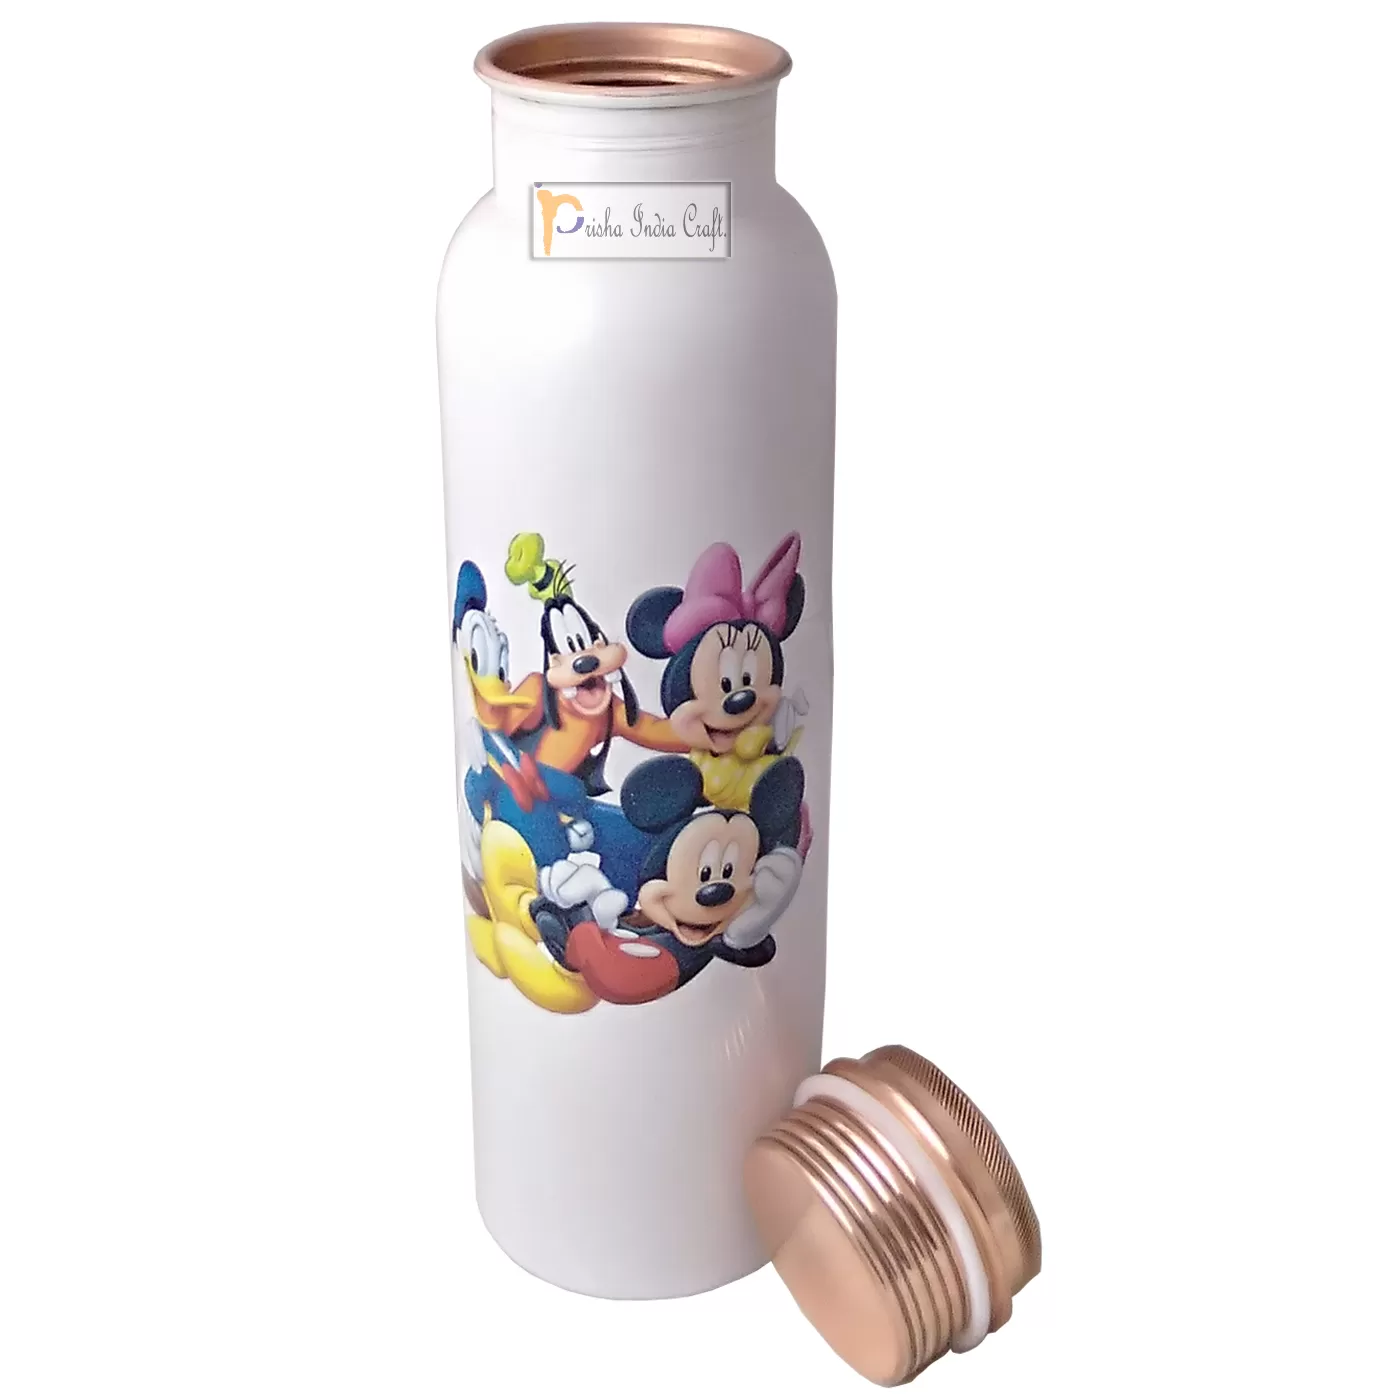 Digital Printed Pure Copper Water Bottle Kids School Water Bottle Mickey Mouse and Donald Design, 1000 ML |Set of 2, 2 image